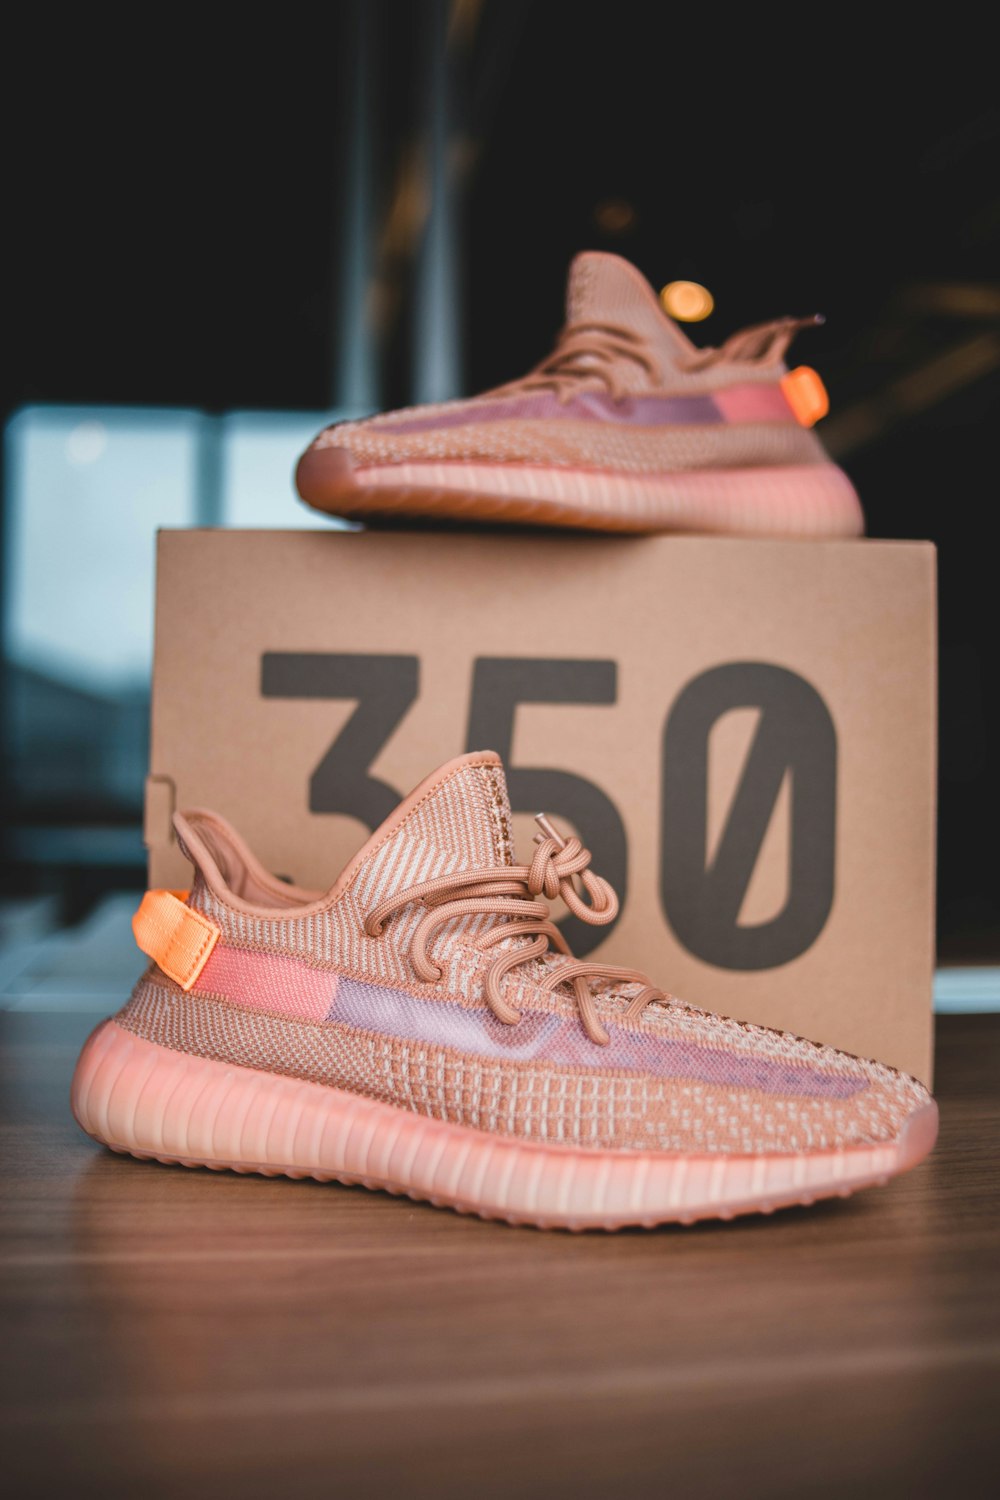 pair of pink Adidas Yeezy Boost 350 on brown wooden surface photo – Free  Footwear Image on Unsplash